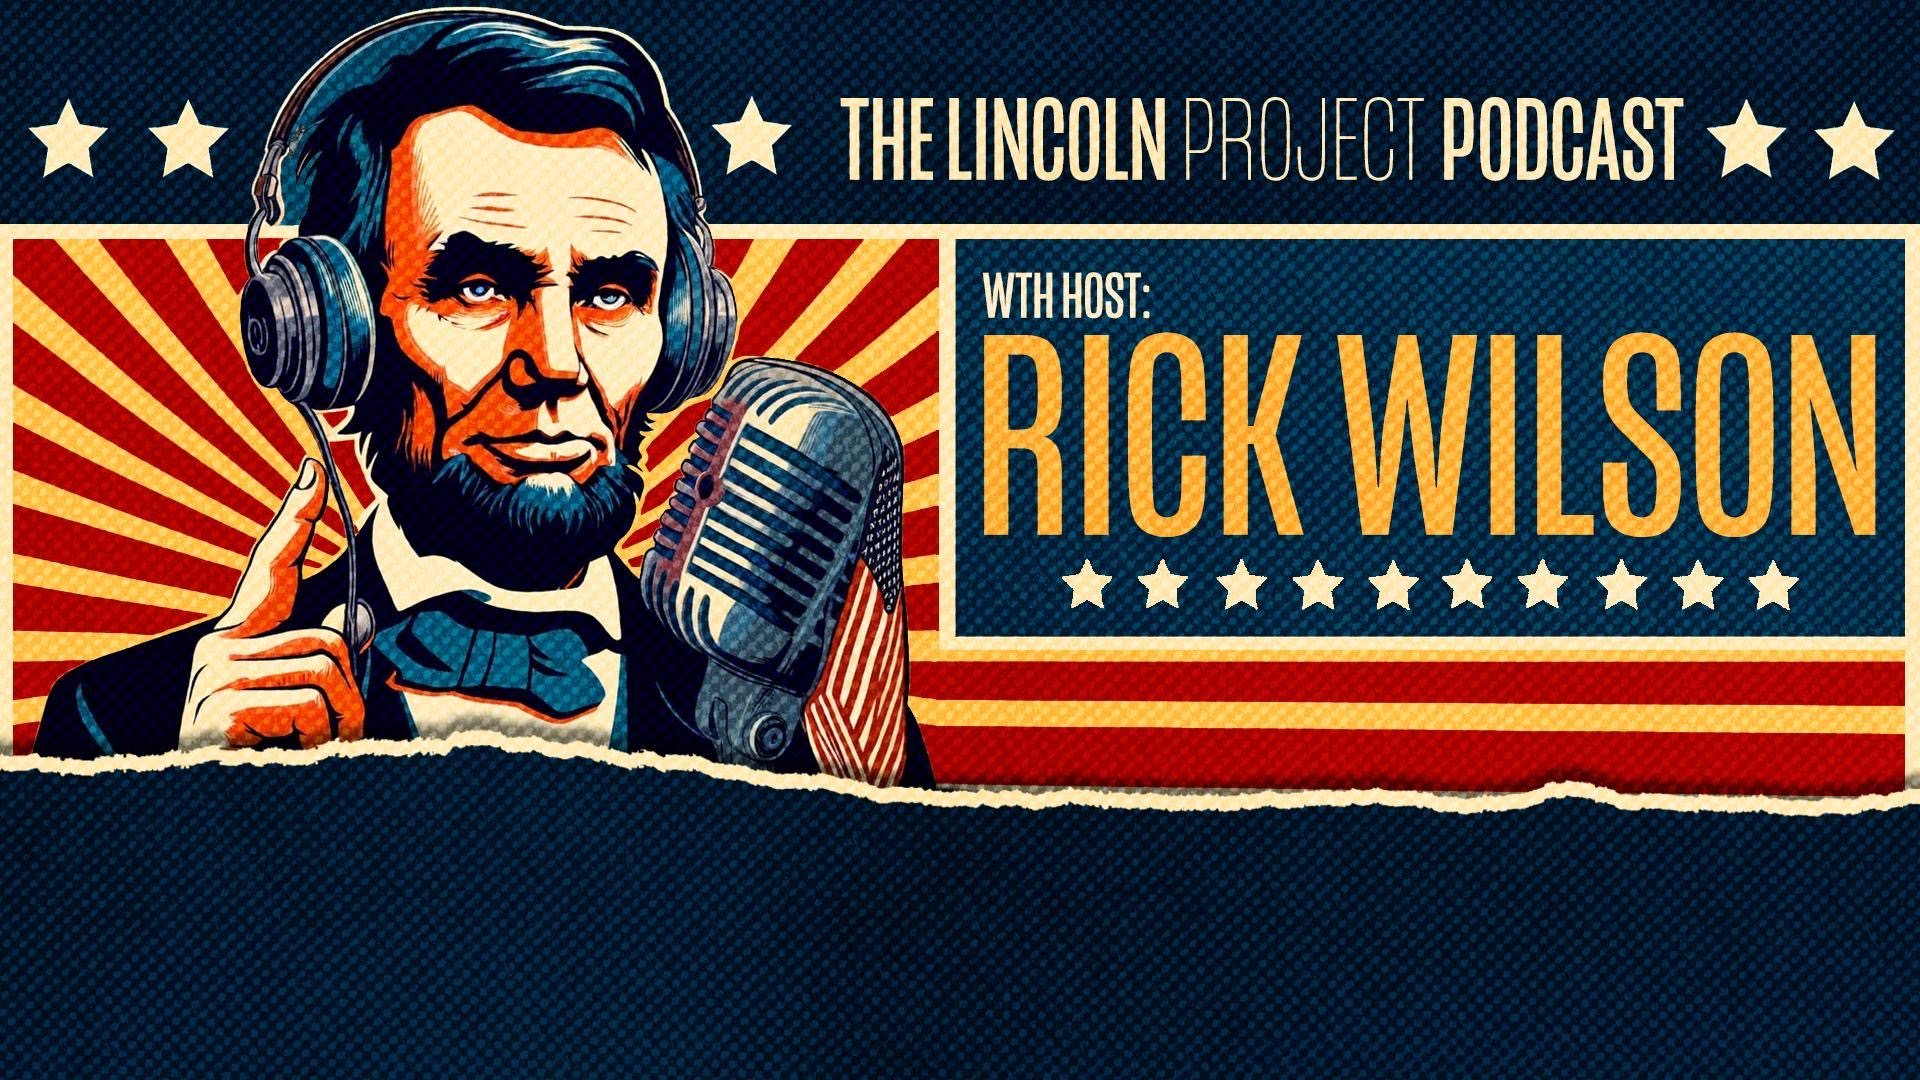 The Lincoln Project Podcast